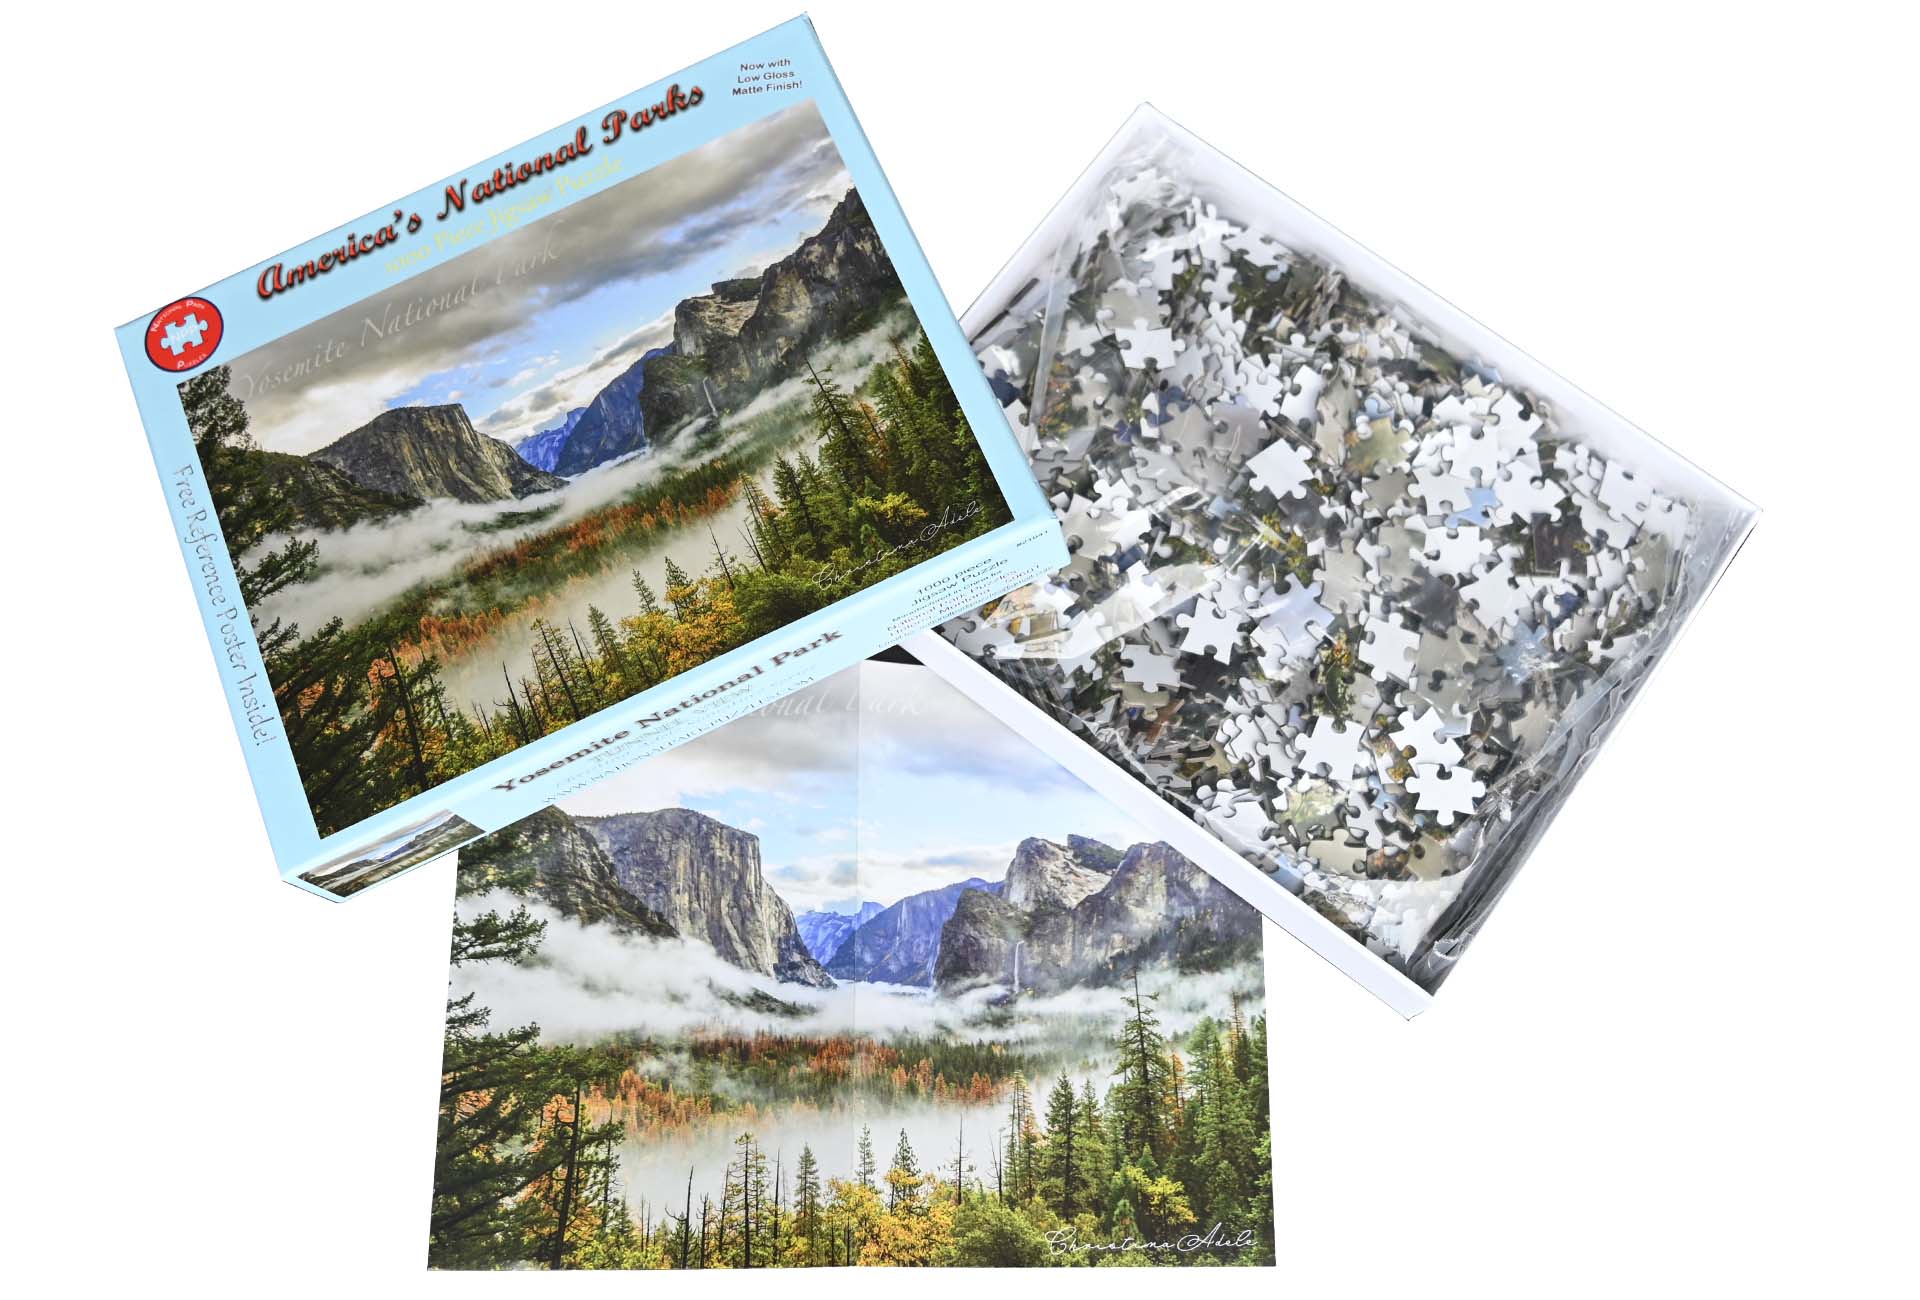 Yosemite National Park Tunnel View 1000 Piece Jigsaw Puzzle - National Park  Puzzles